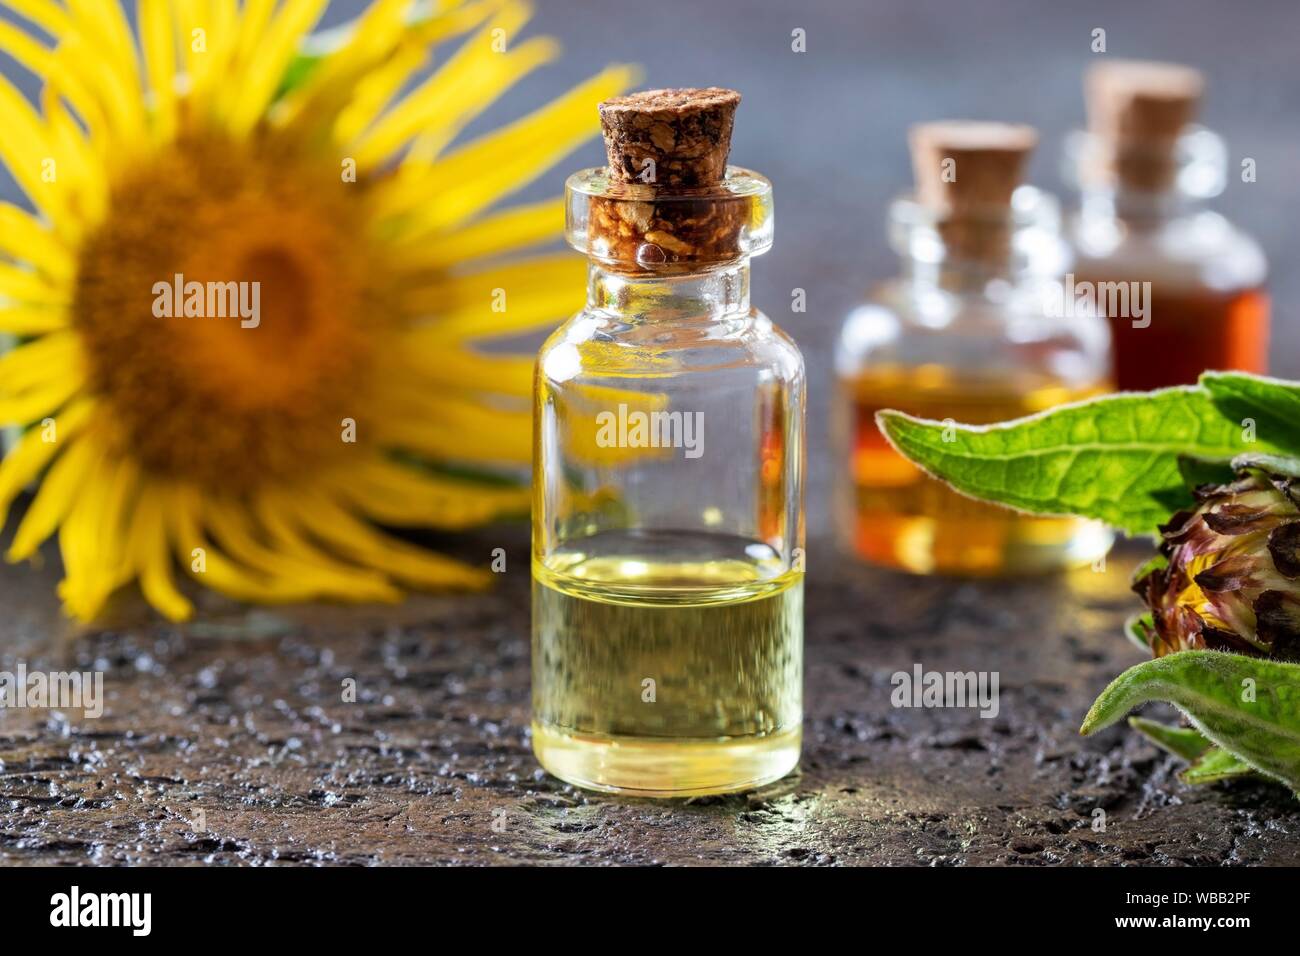 A bottle of essential oil with fresh Inula helenium plant. Stock Photo